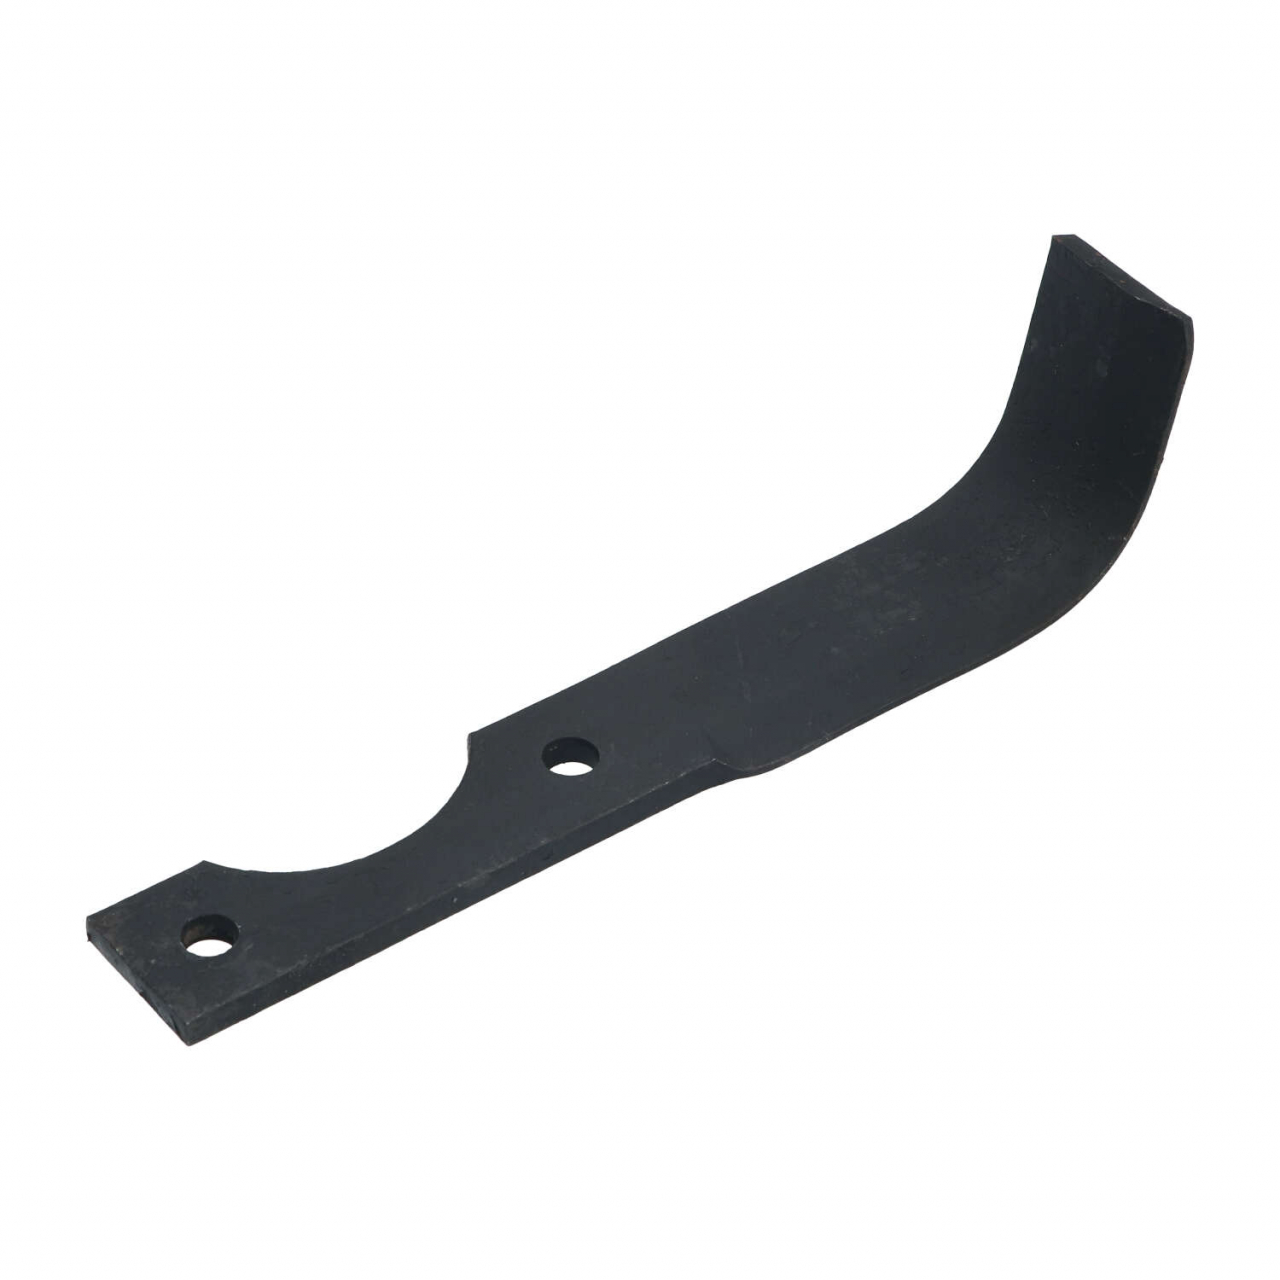 Blade, right model fitting for Gutbrod 75.73.027